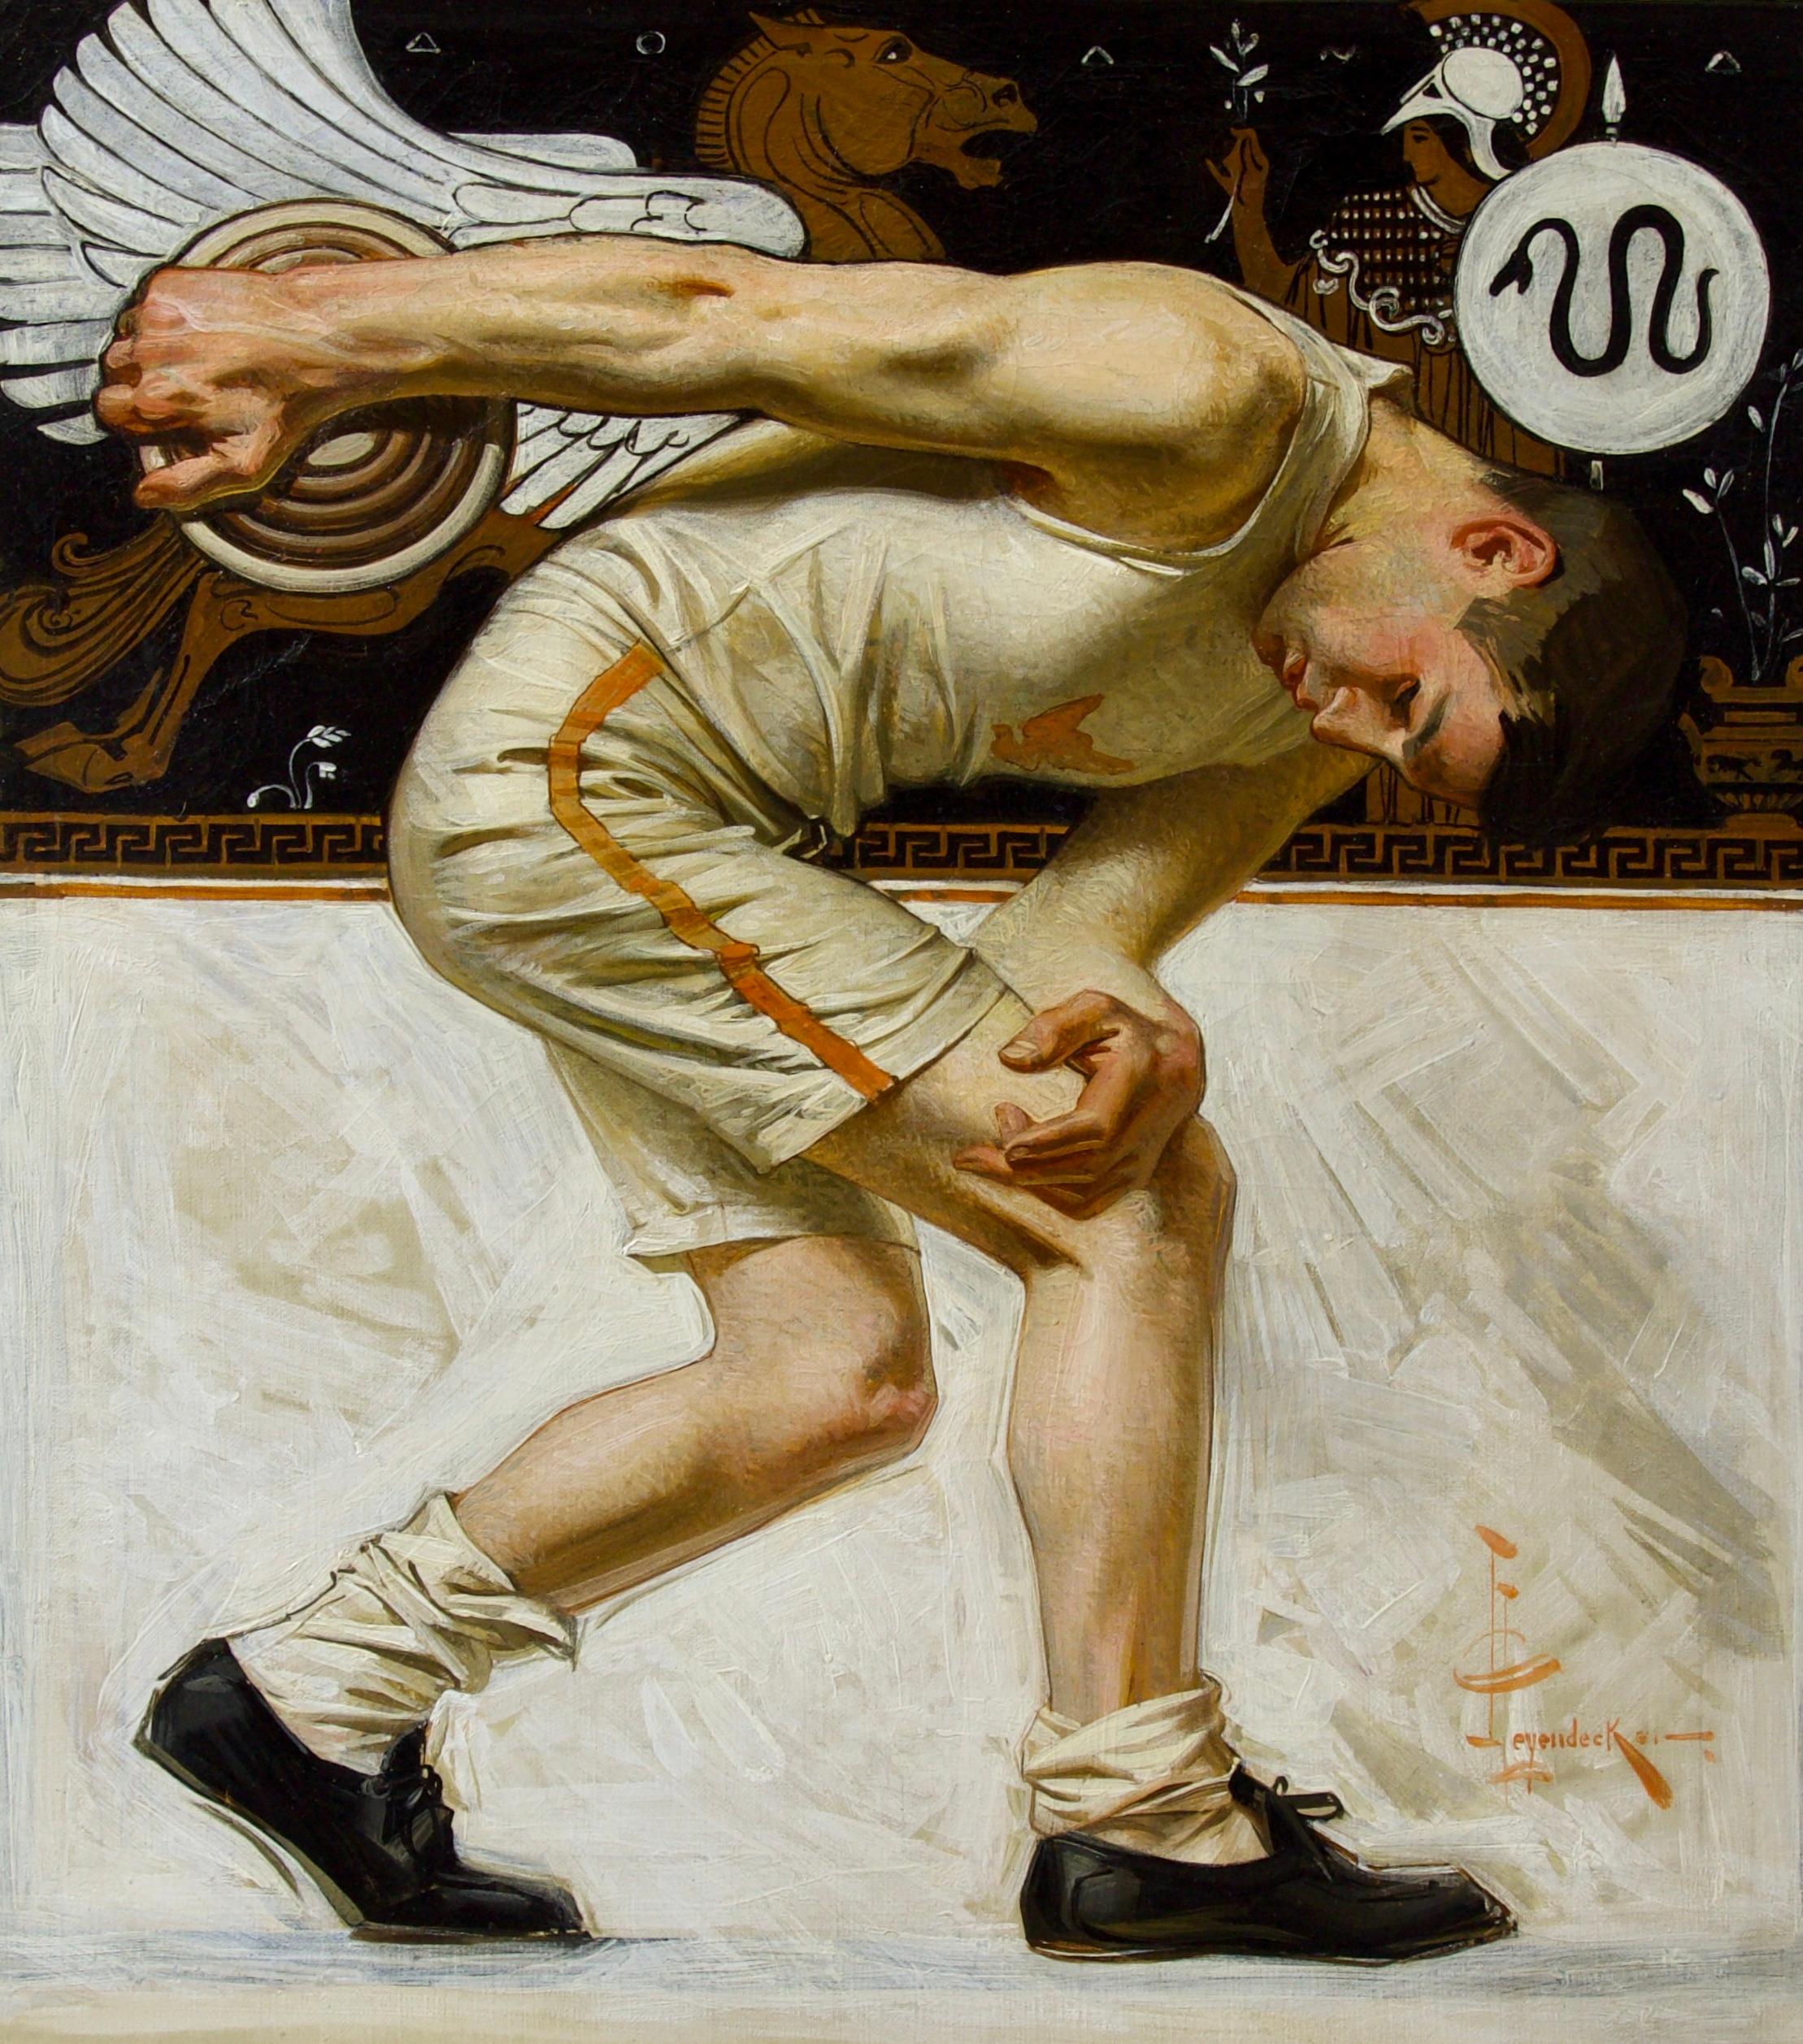 Signed by Artist Signed Lower Right

The Discus Thrower, The American Victory at Athens, Collier's Weekly magazine cover, June 9, 1906

LITERATURE:
L.S. Cutler and J.G. Cutler, J.C. Leyendecker, American Imagist, New York, 2008, p. 177, illustrated.